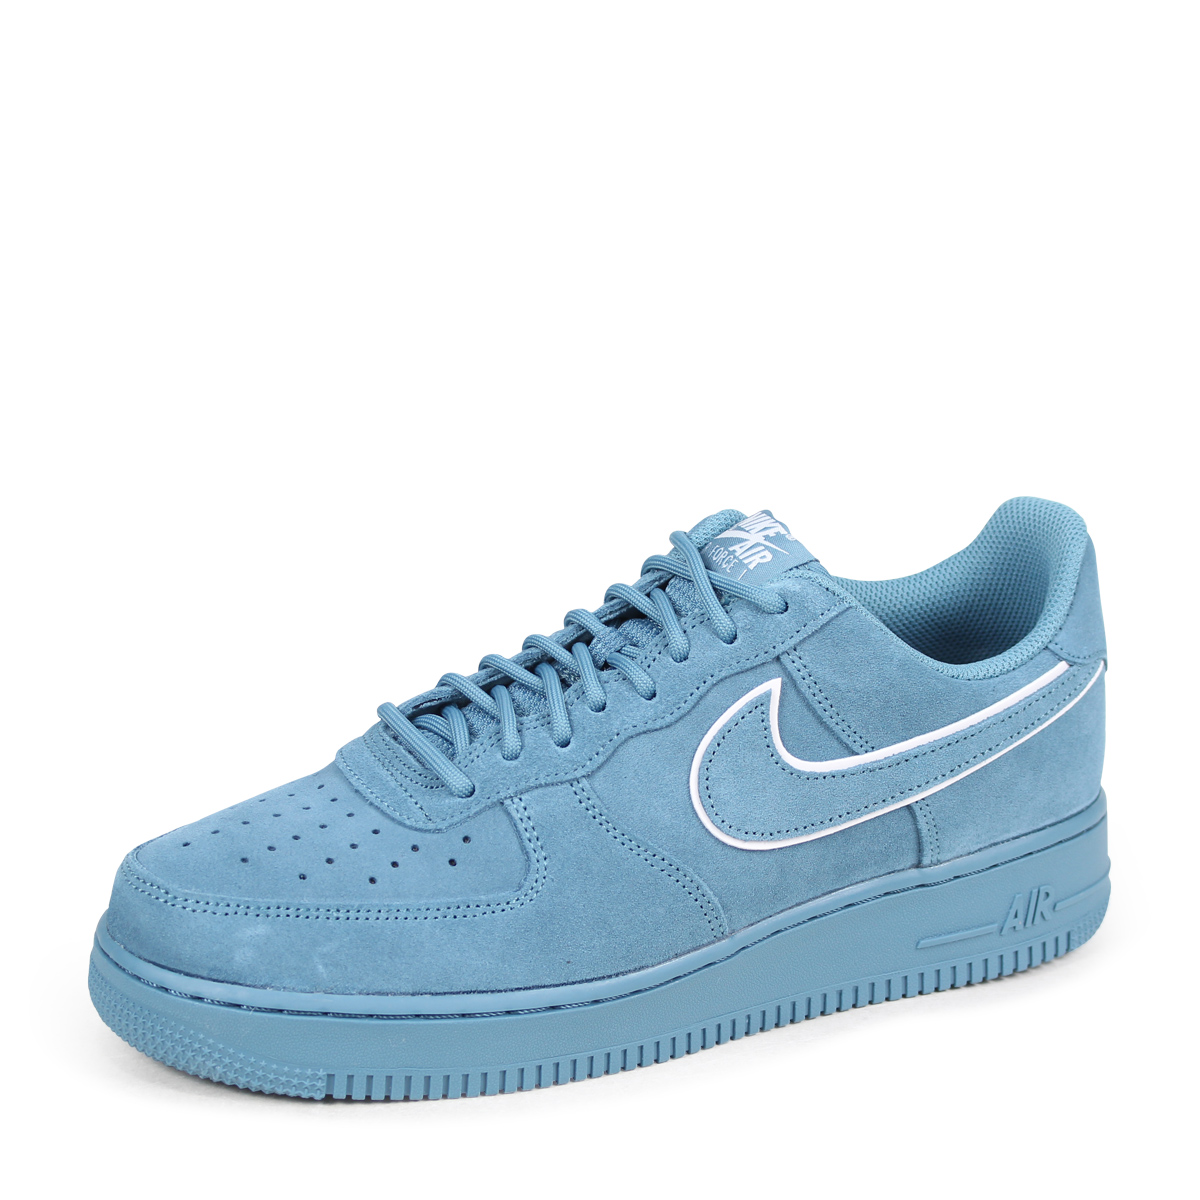 ALLSPORTS: NIKE AIR FORCE 1 SUEDE Nike air force 1 07 LV8 sneakers 